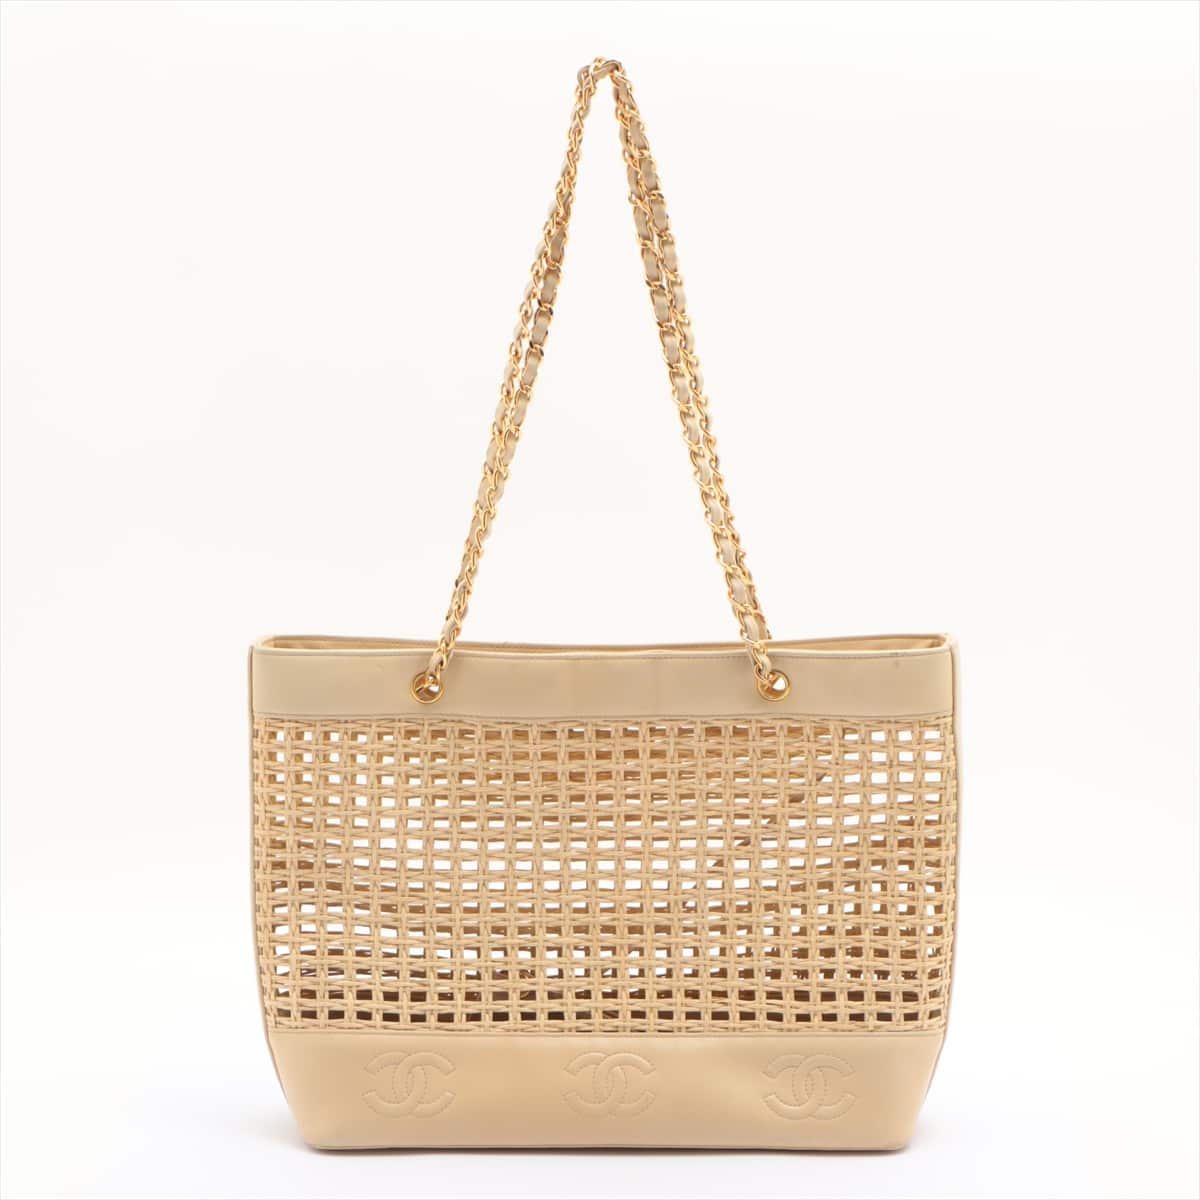 Chanel Triple Coco Straw & leather Chain tote bag Beige Gold Metal fittings 4XXXXXX with pouch